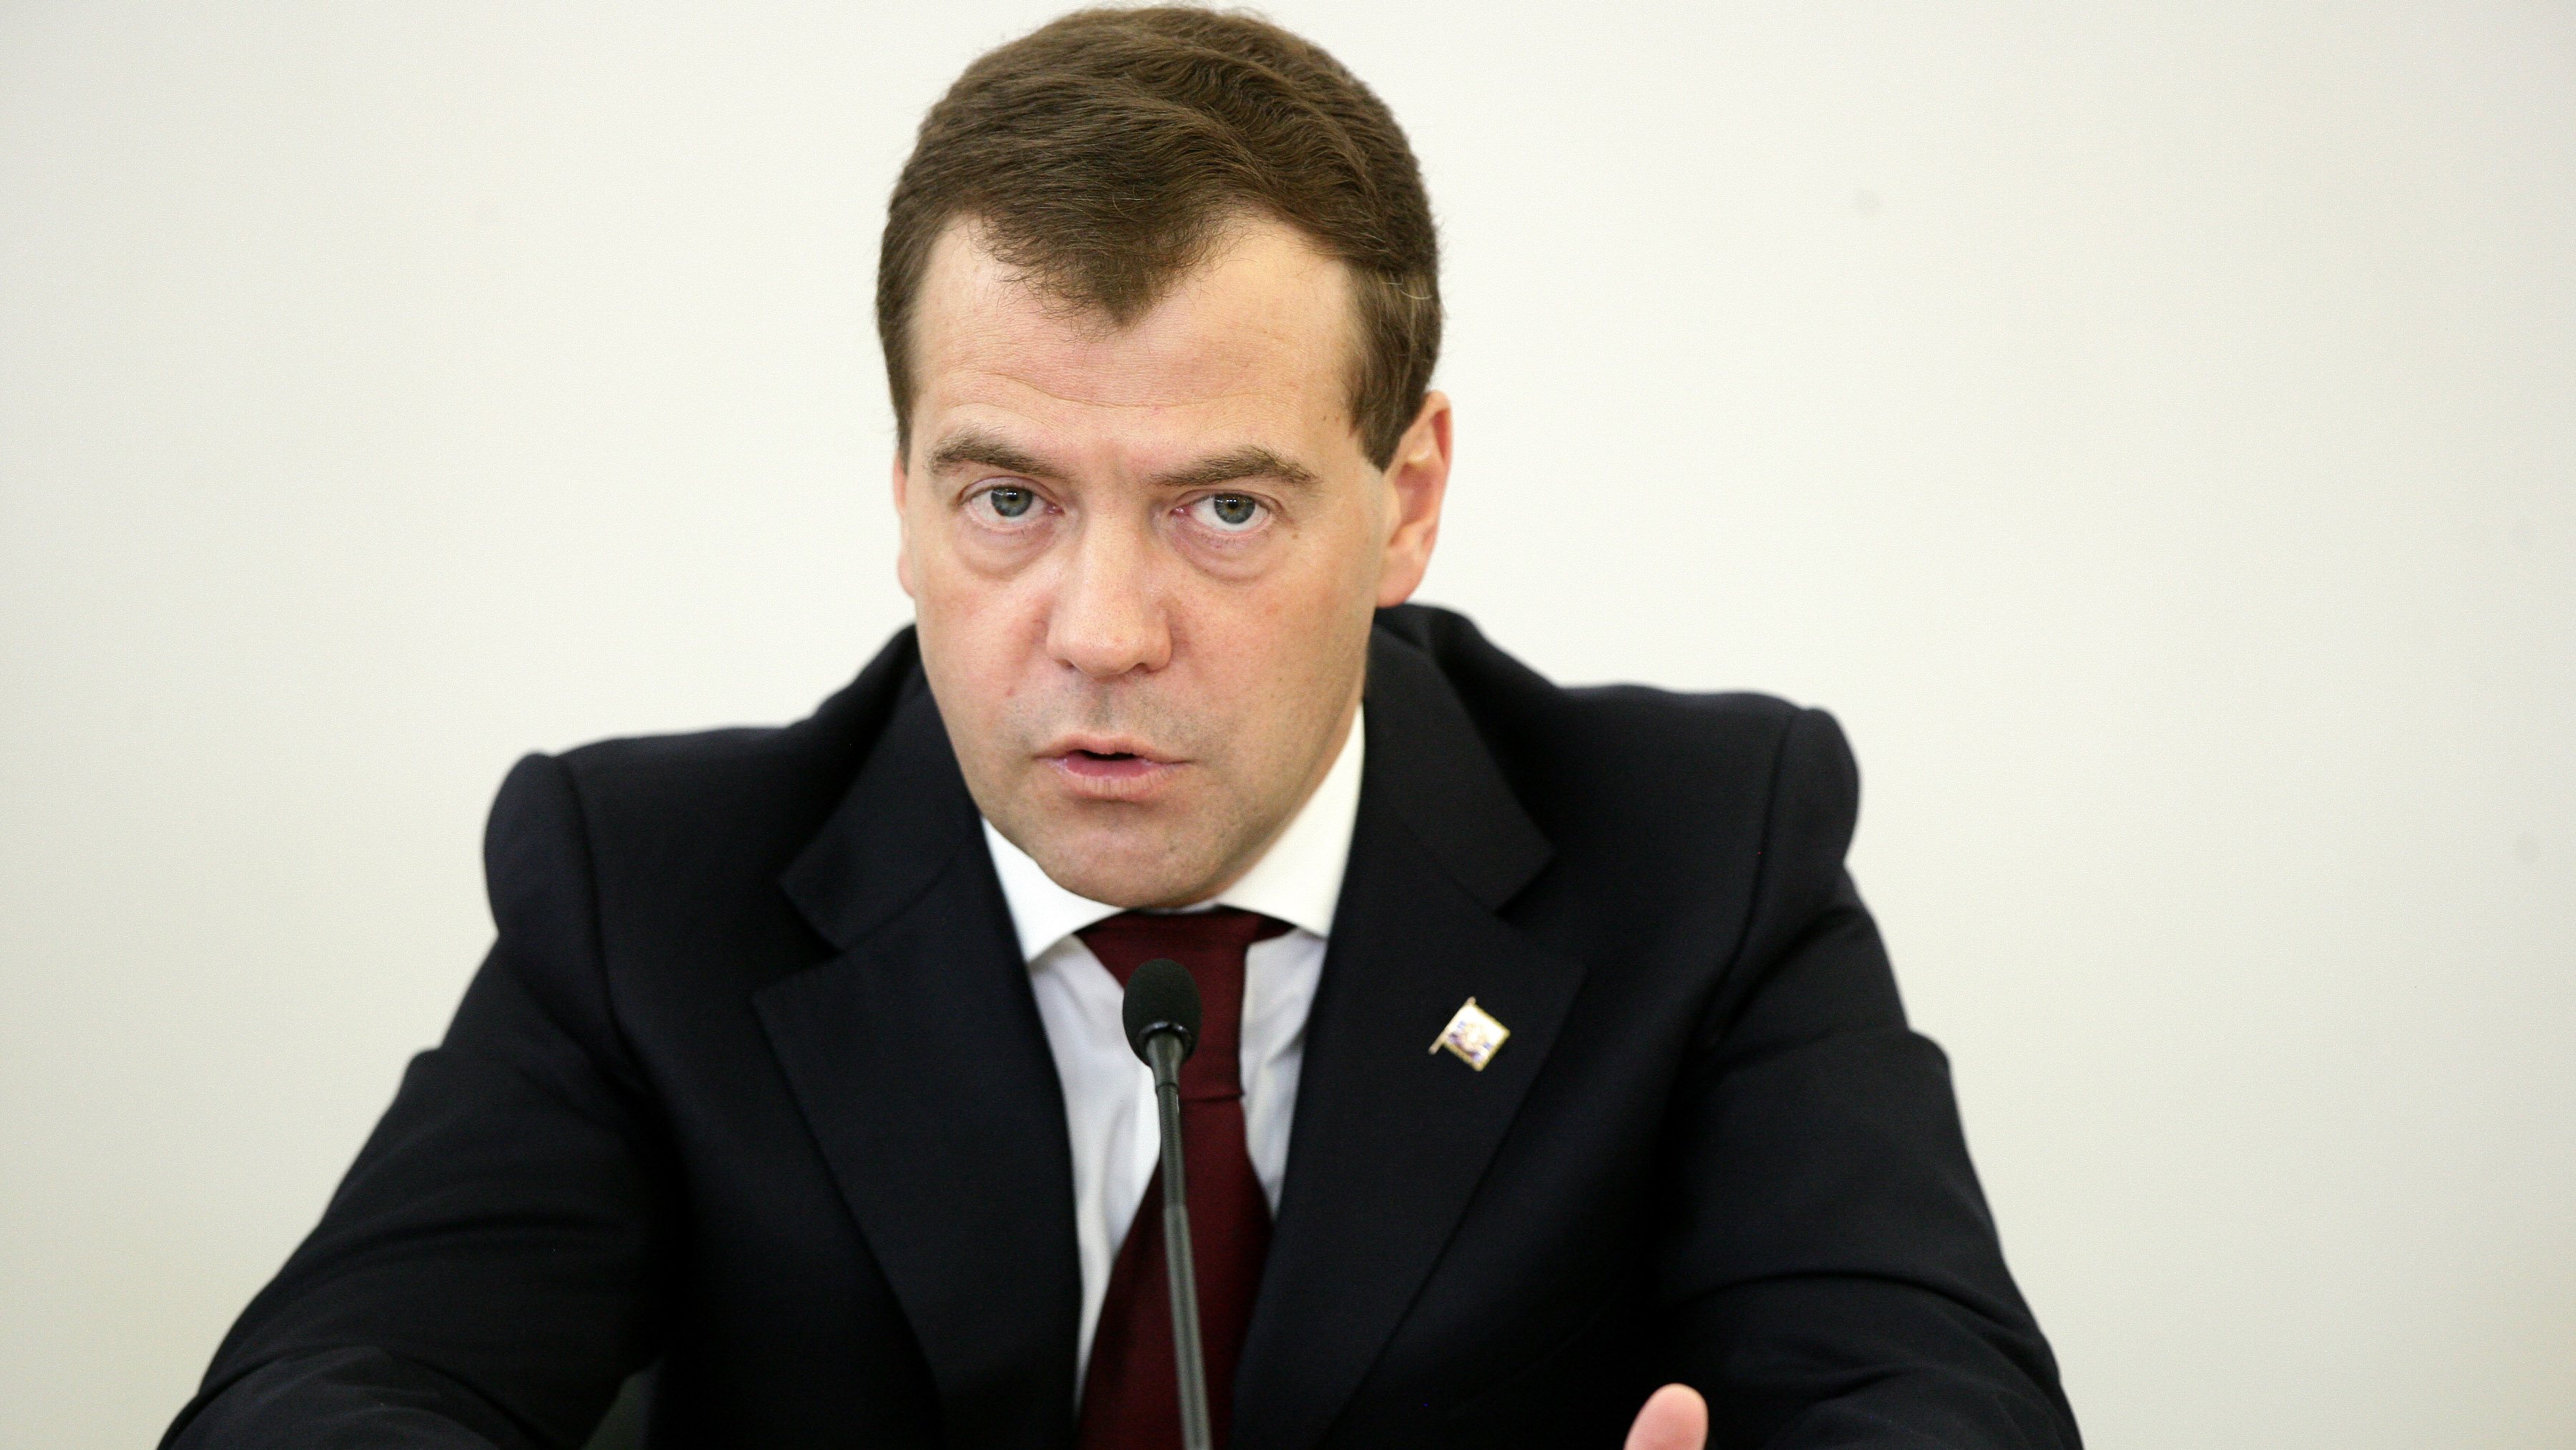 Dmitry Medvedev Attends a Meeting of State Councils In Istra